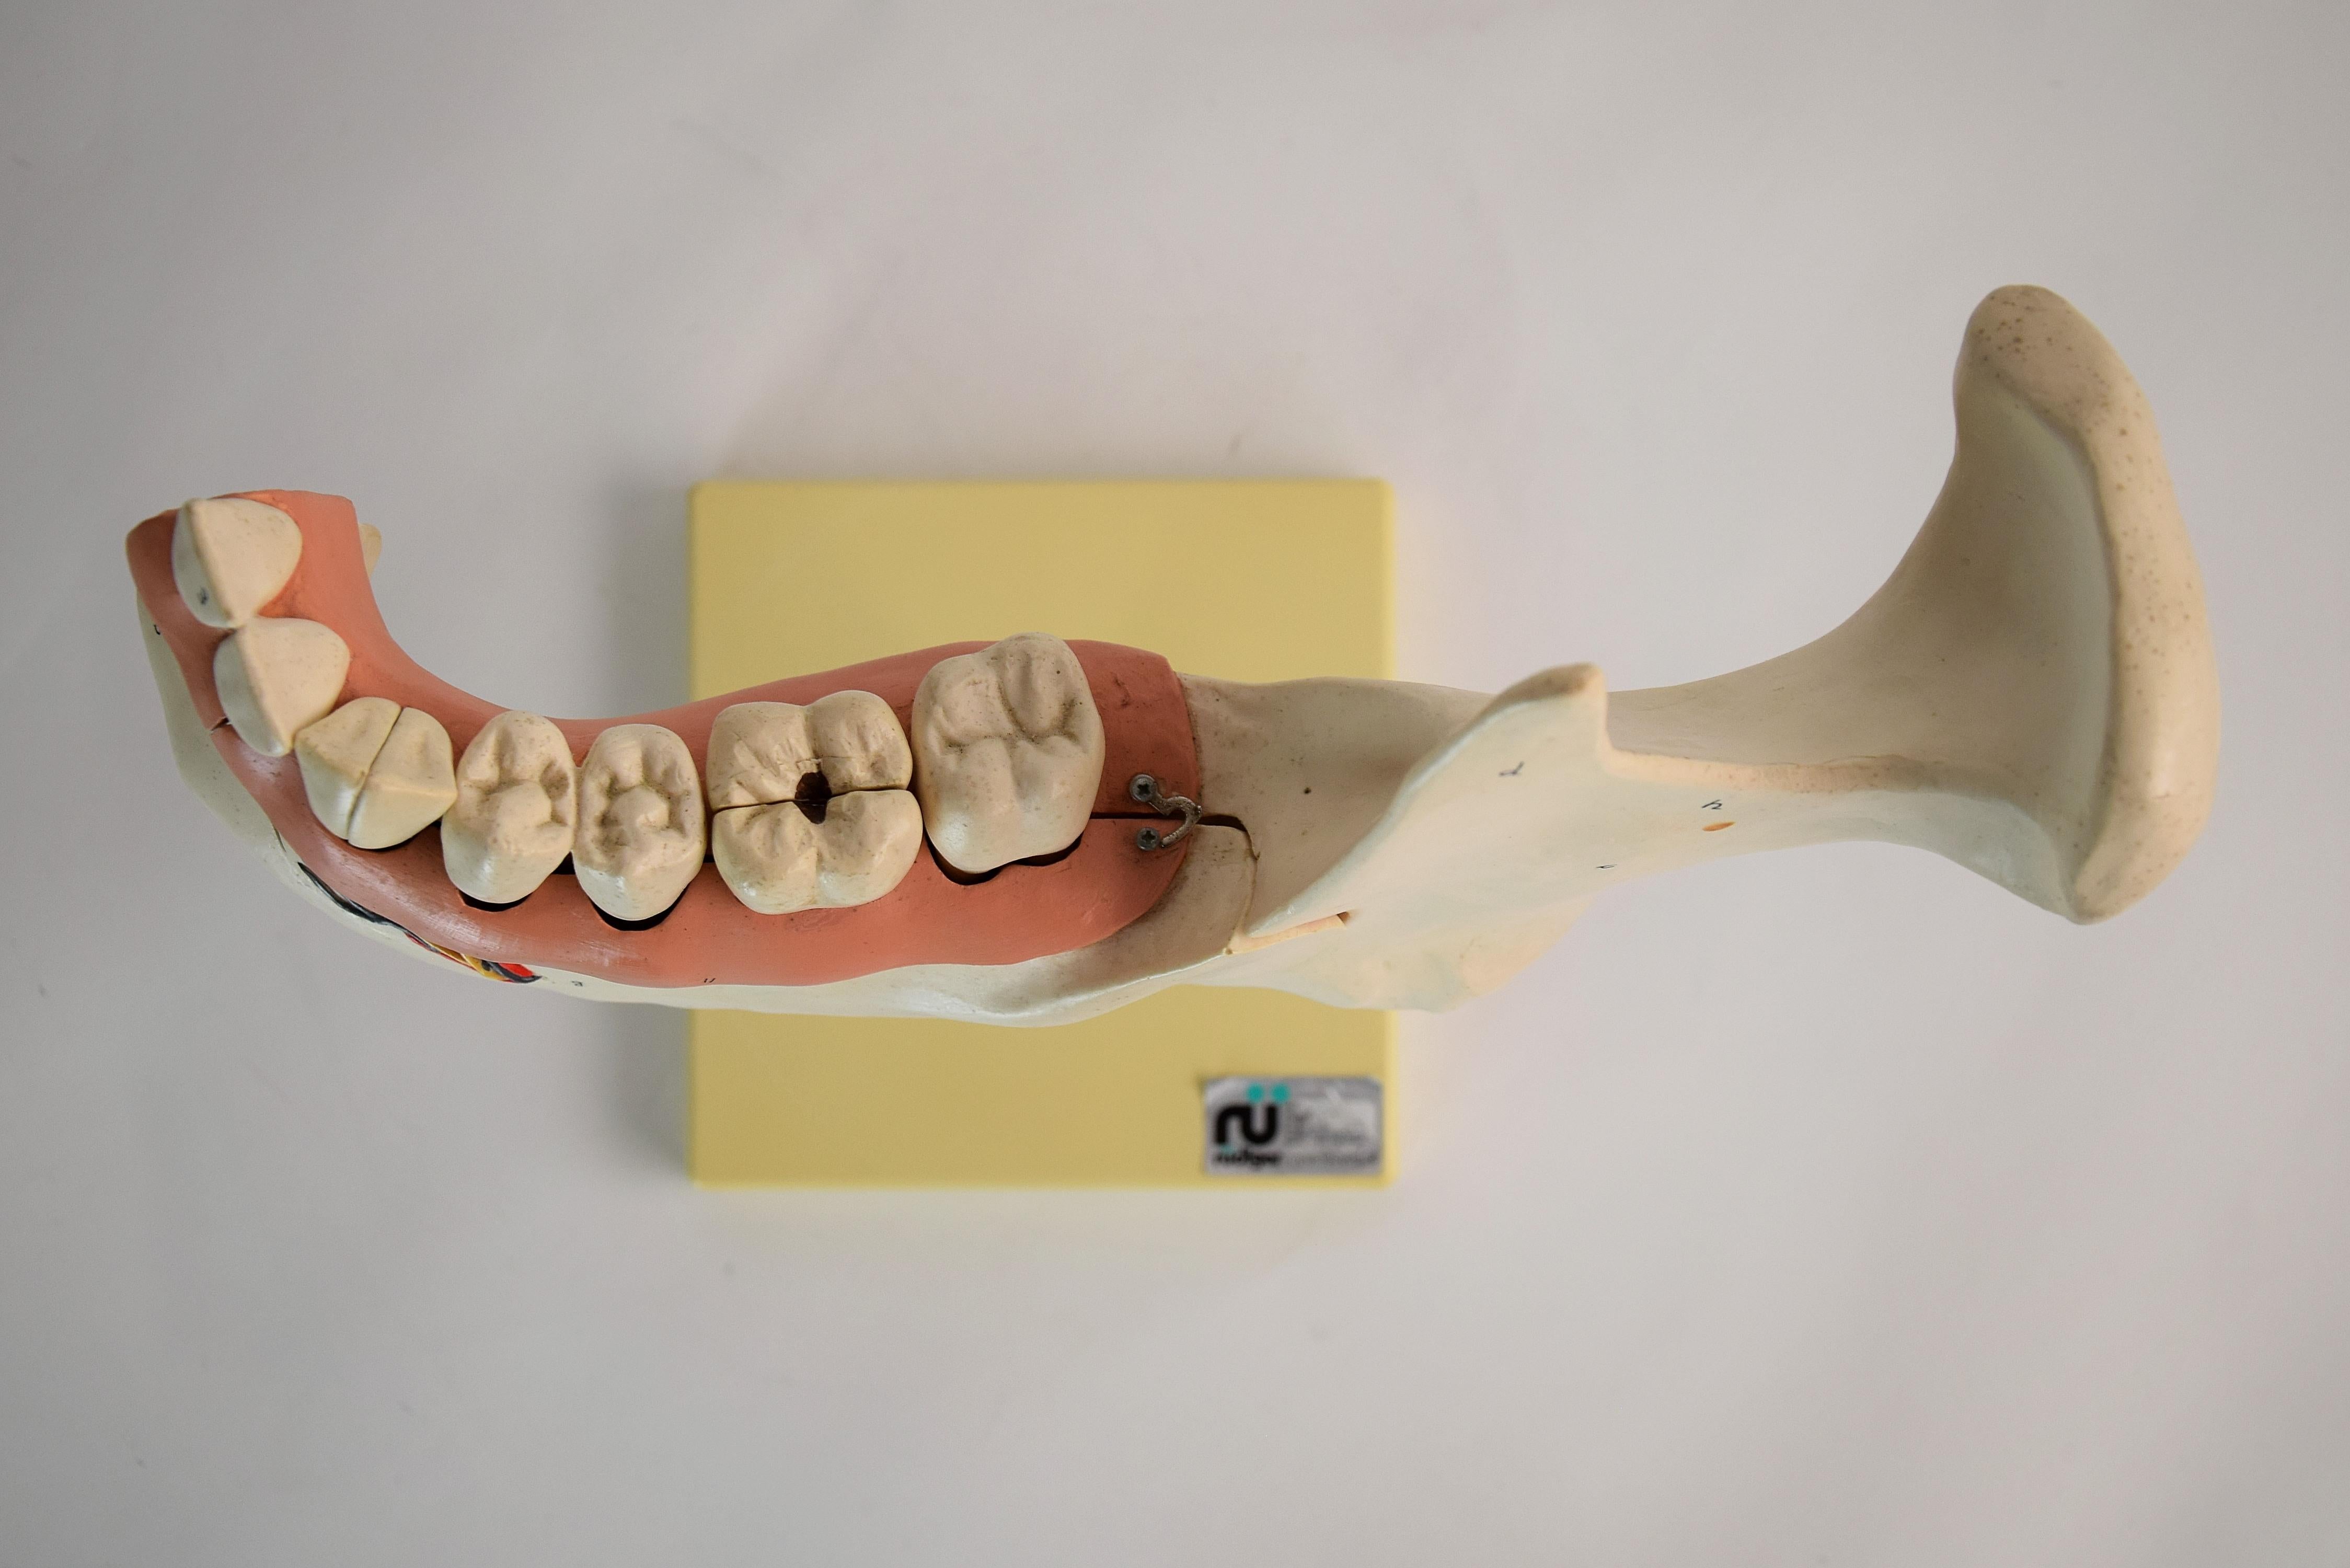 Large Mid-Century Modern Didactic Resin Anatomical Model Jaw For Sale 8